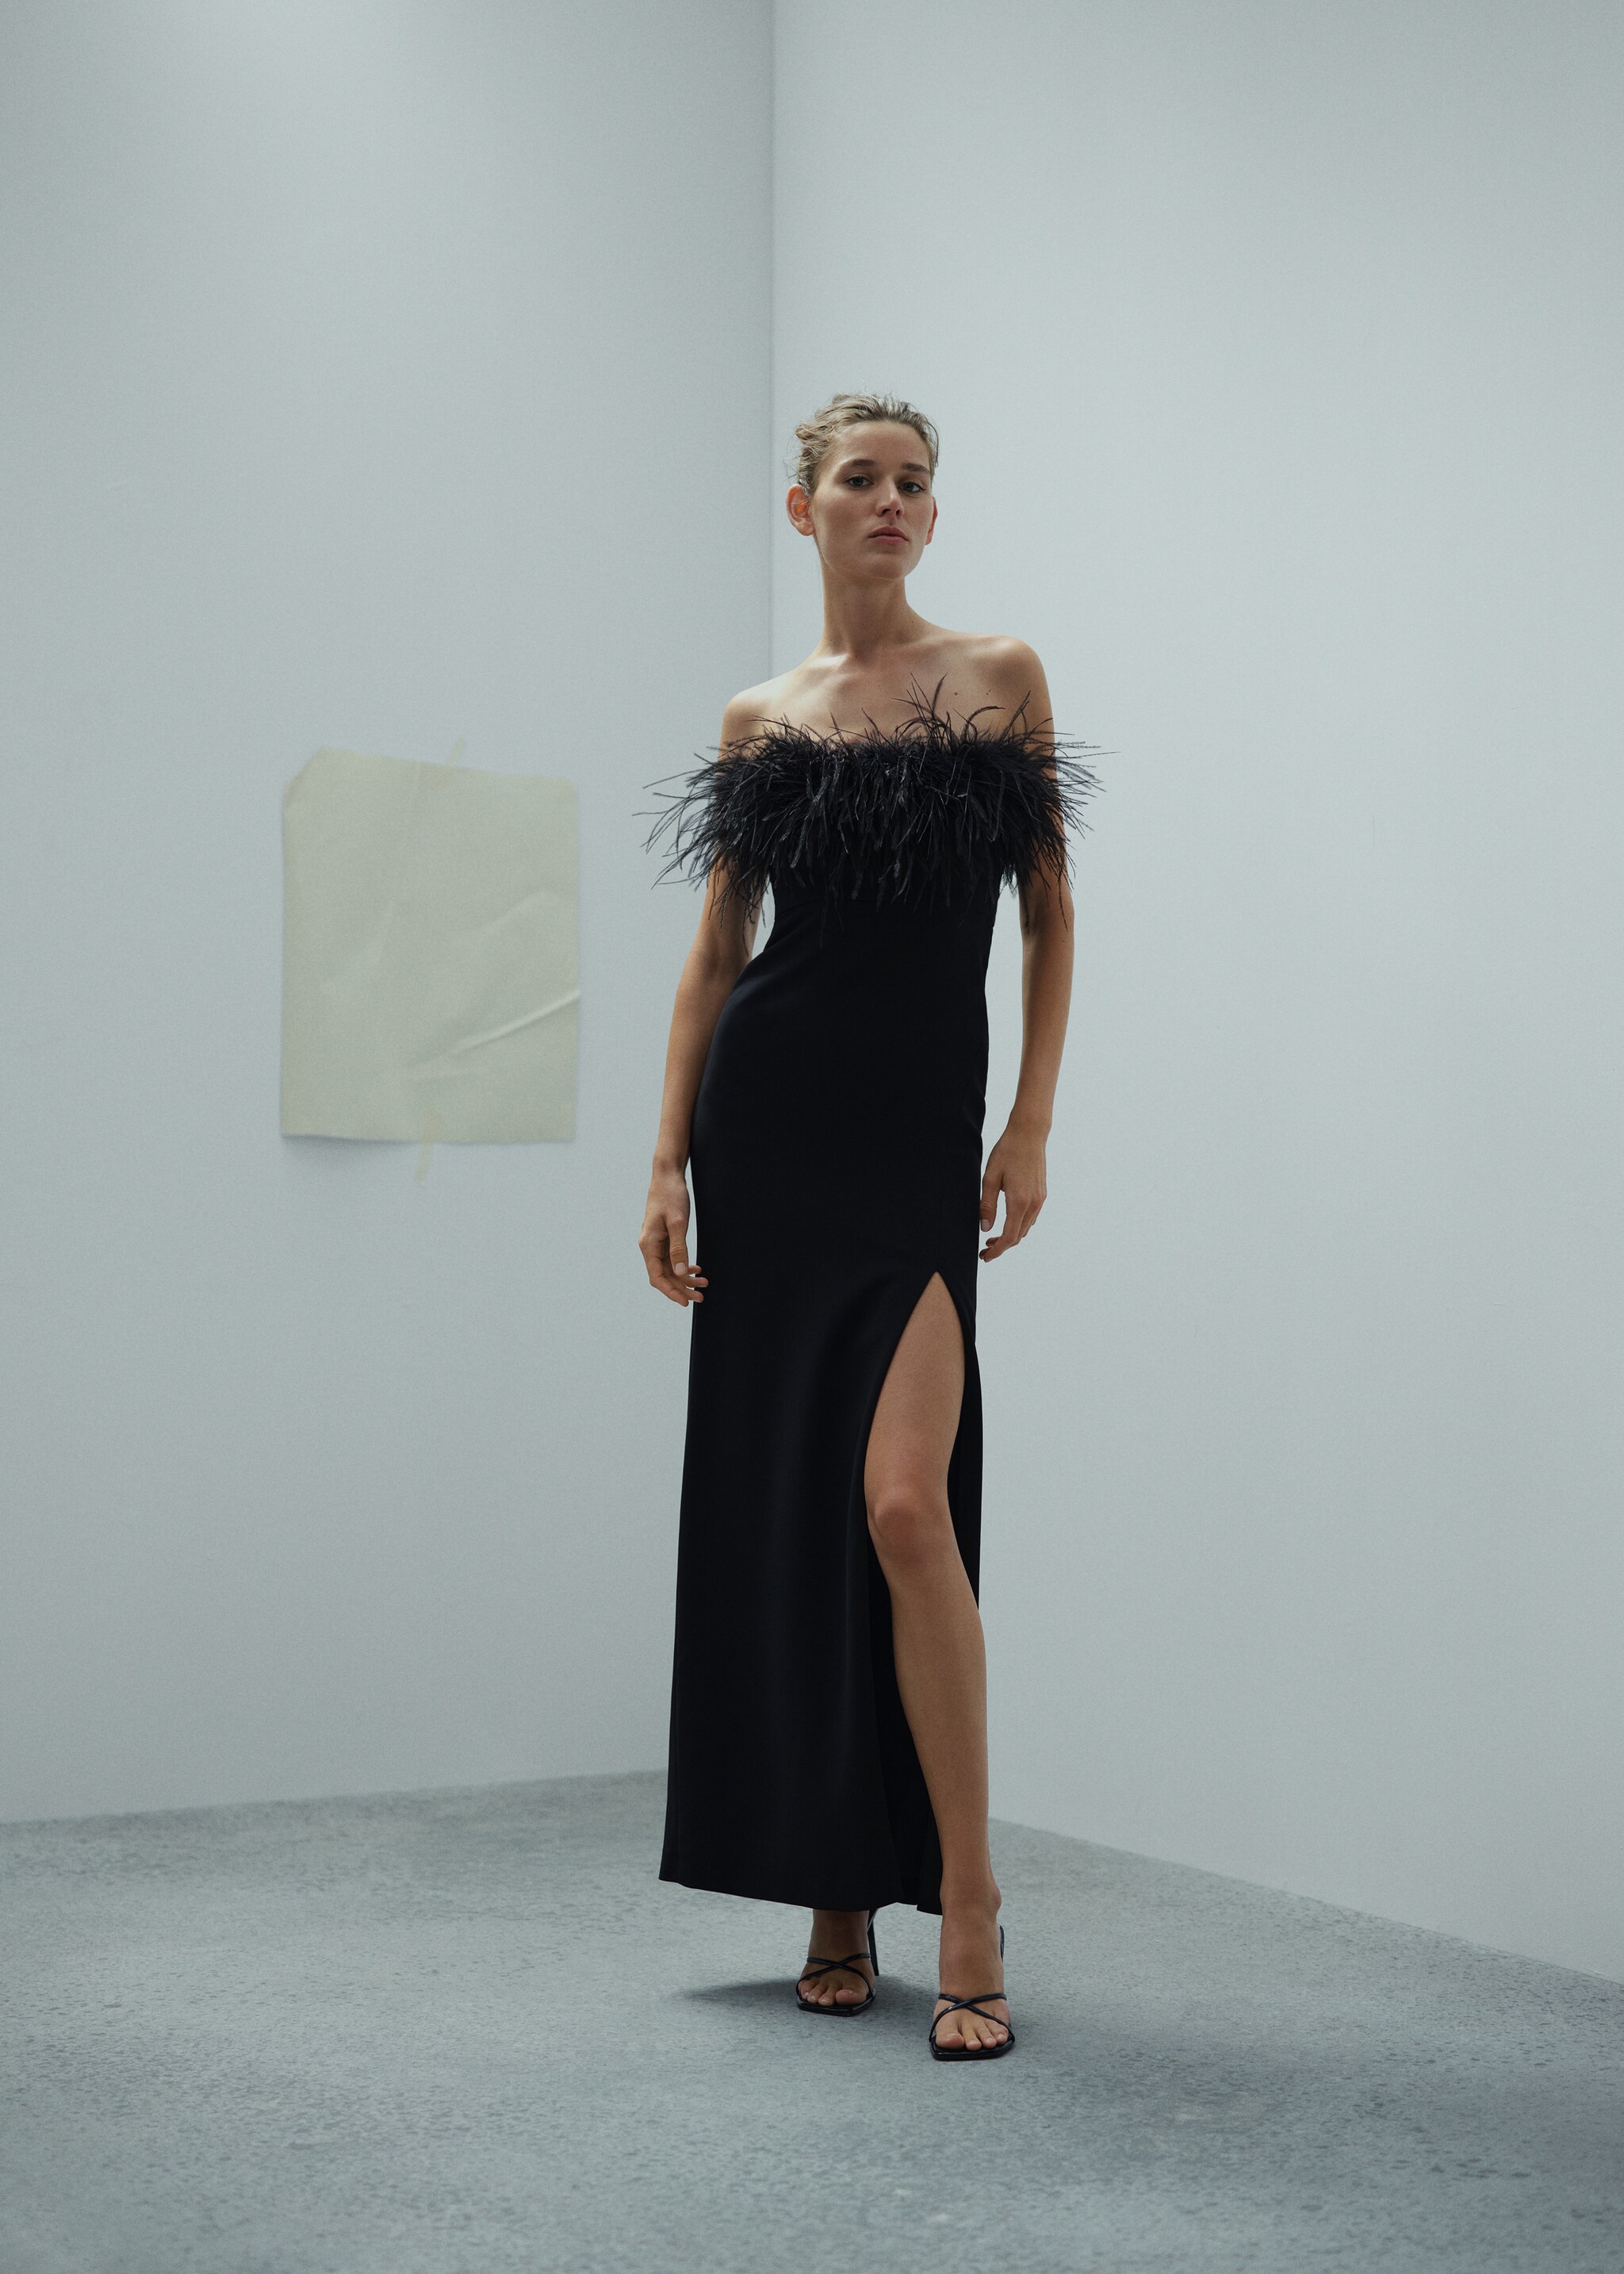 Strapless dress with feather detail - General plane